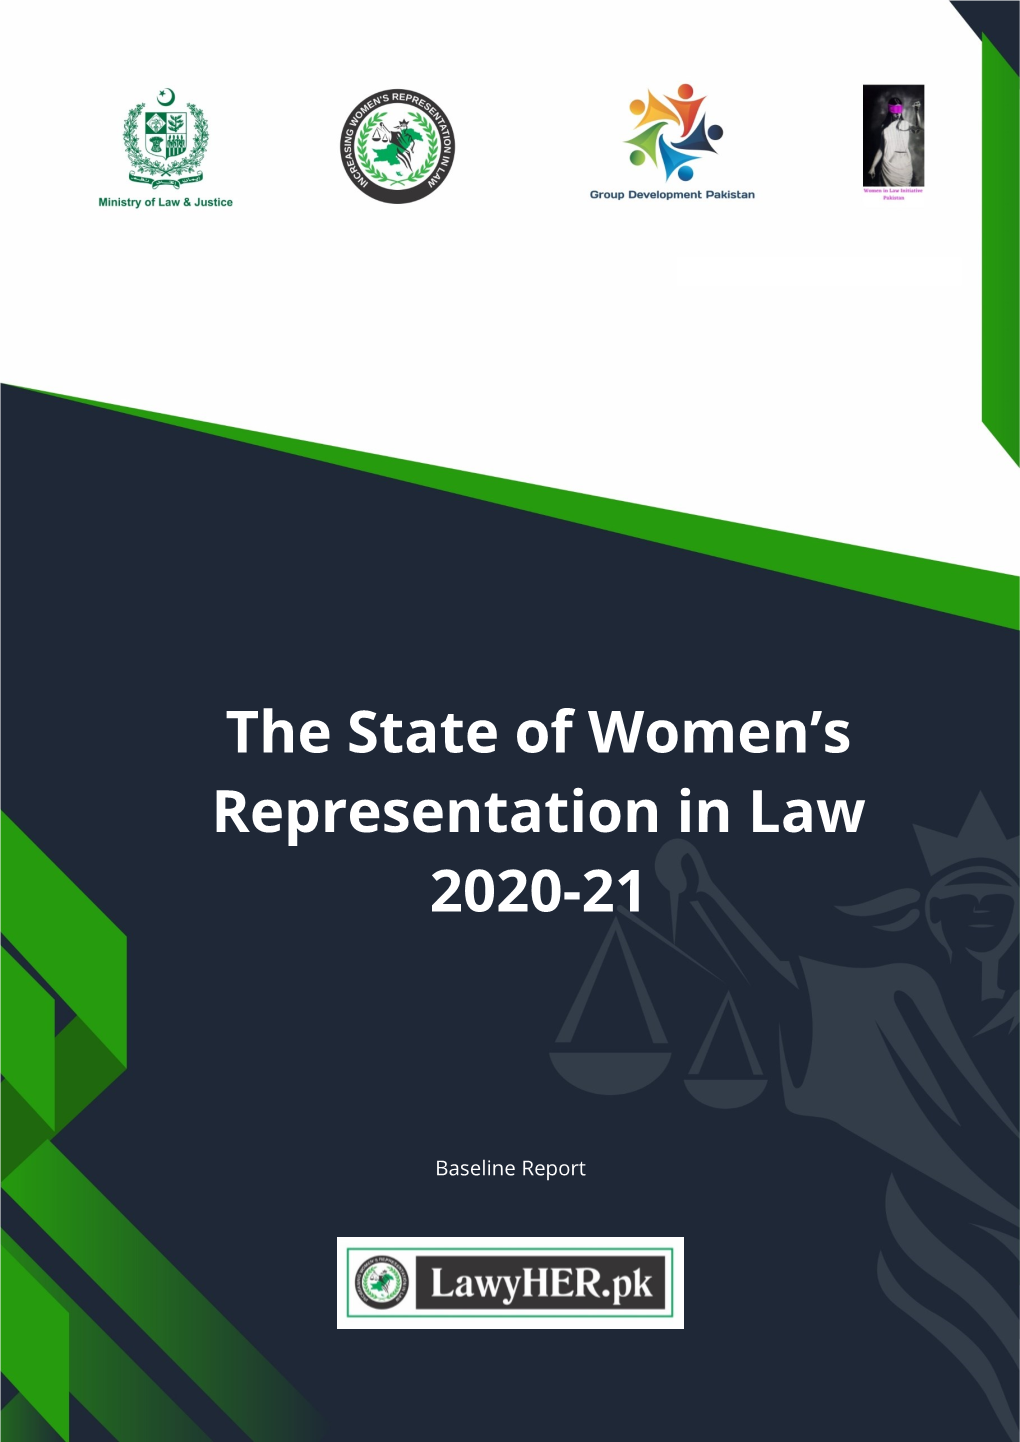 The State of Women's Representation in Law 2020-21